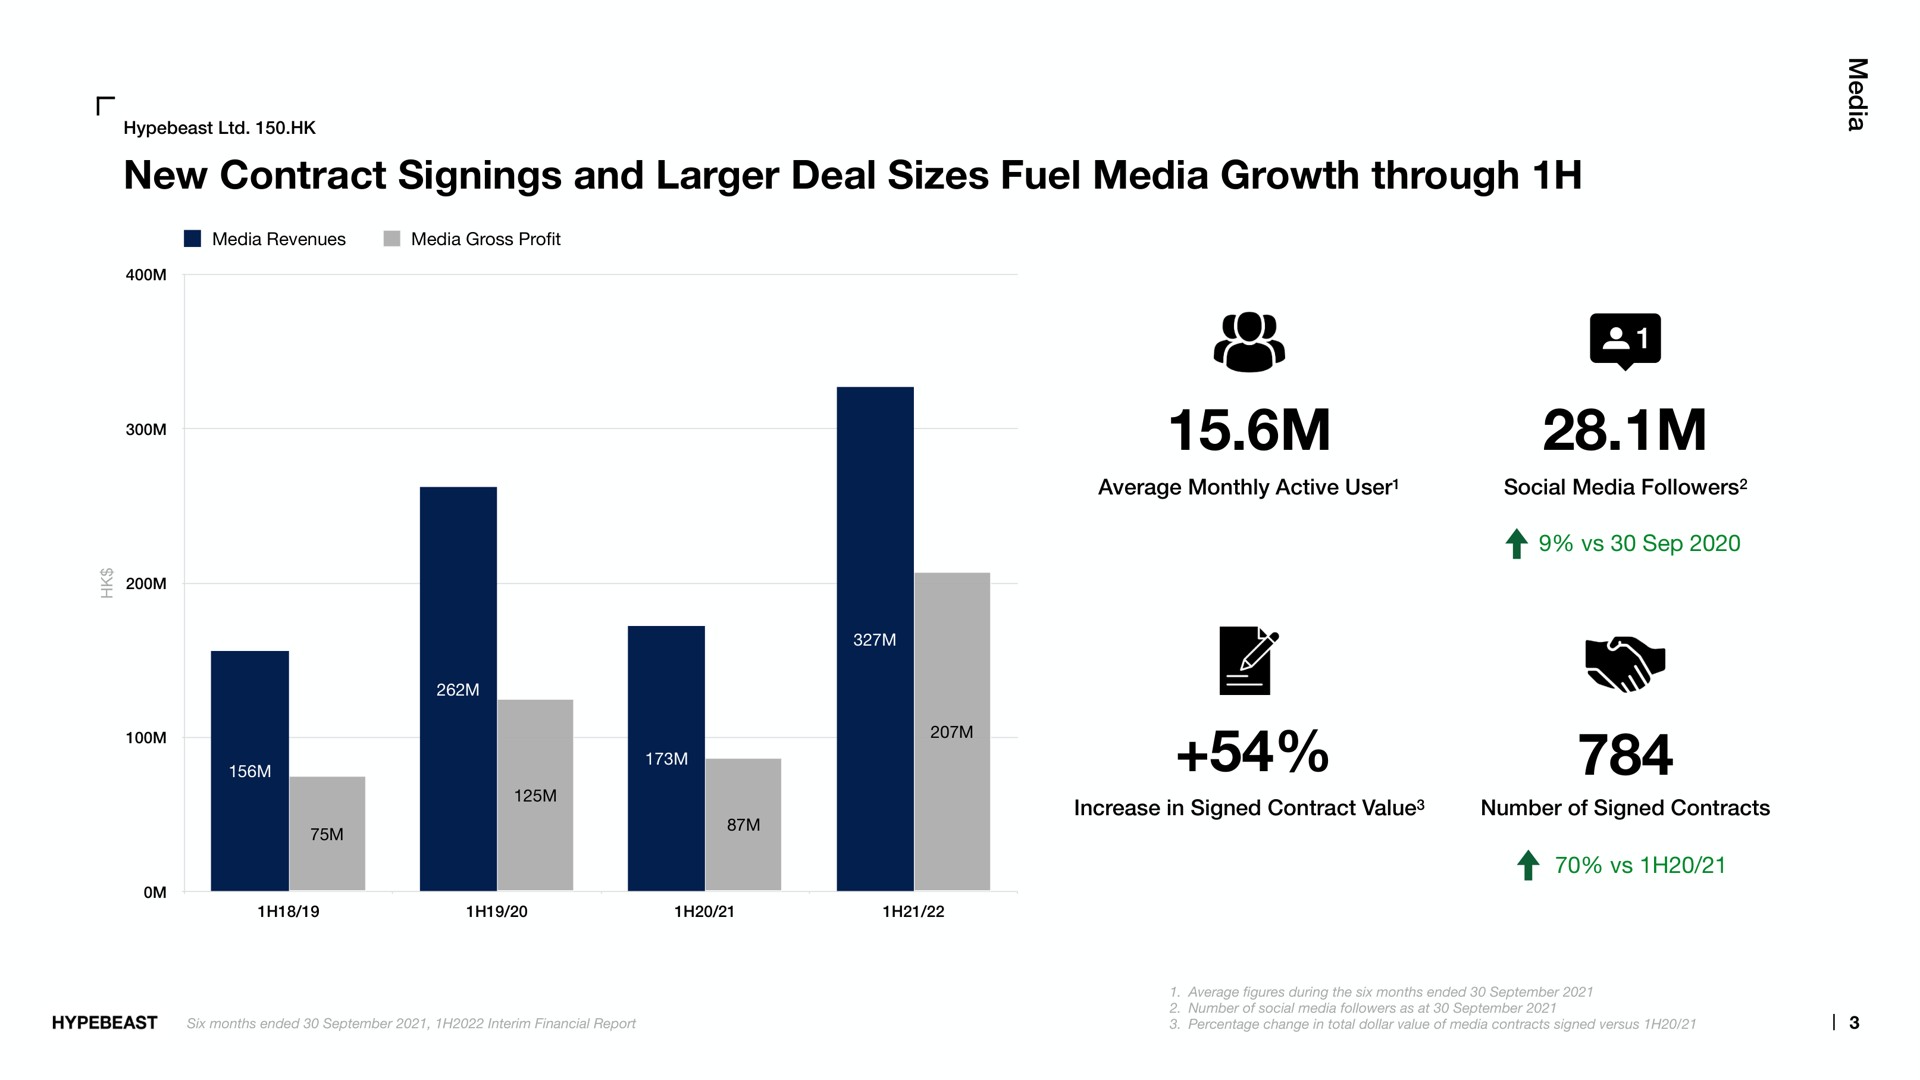 new contract signings and deal sizes fuel media growth through | Hypebeast